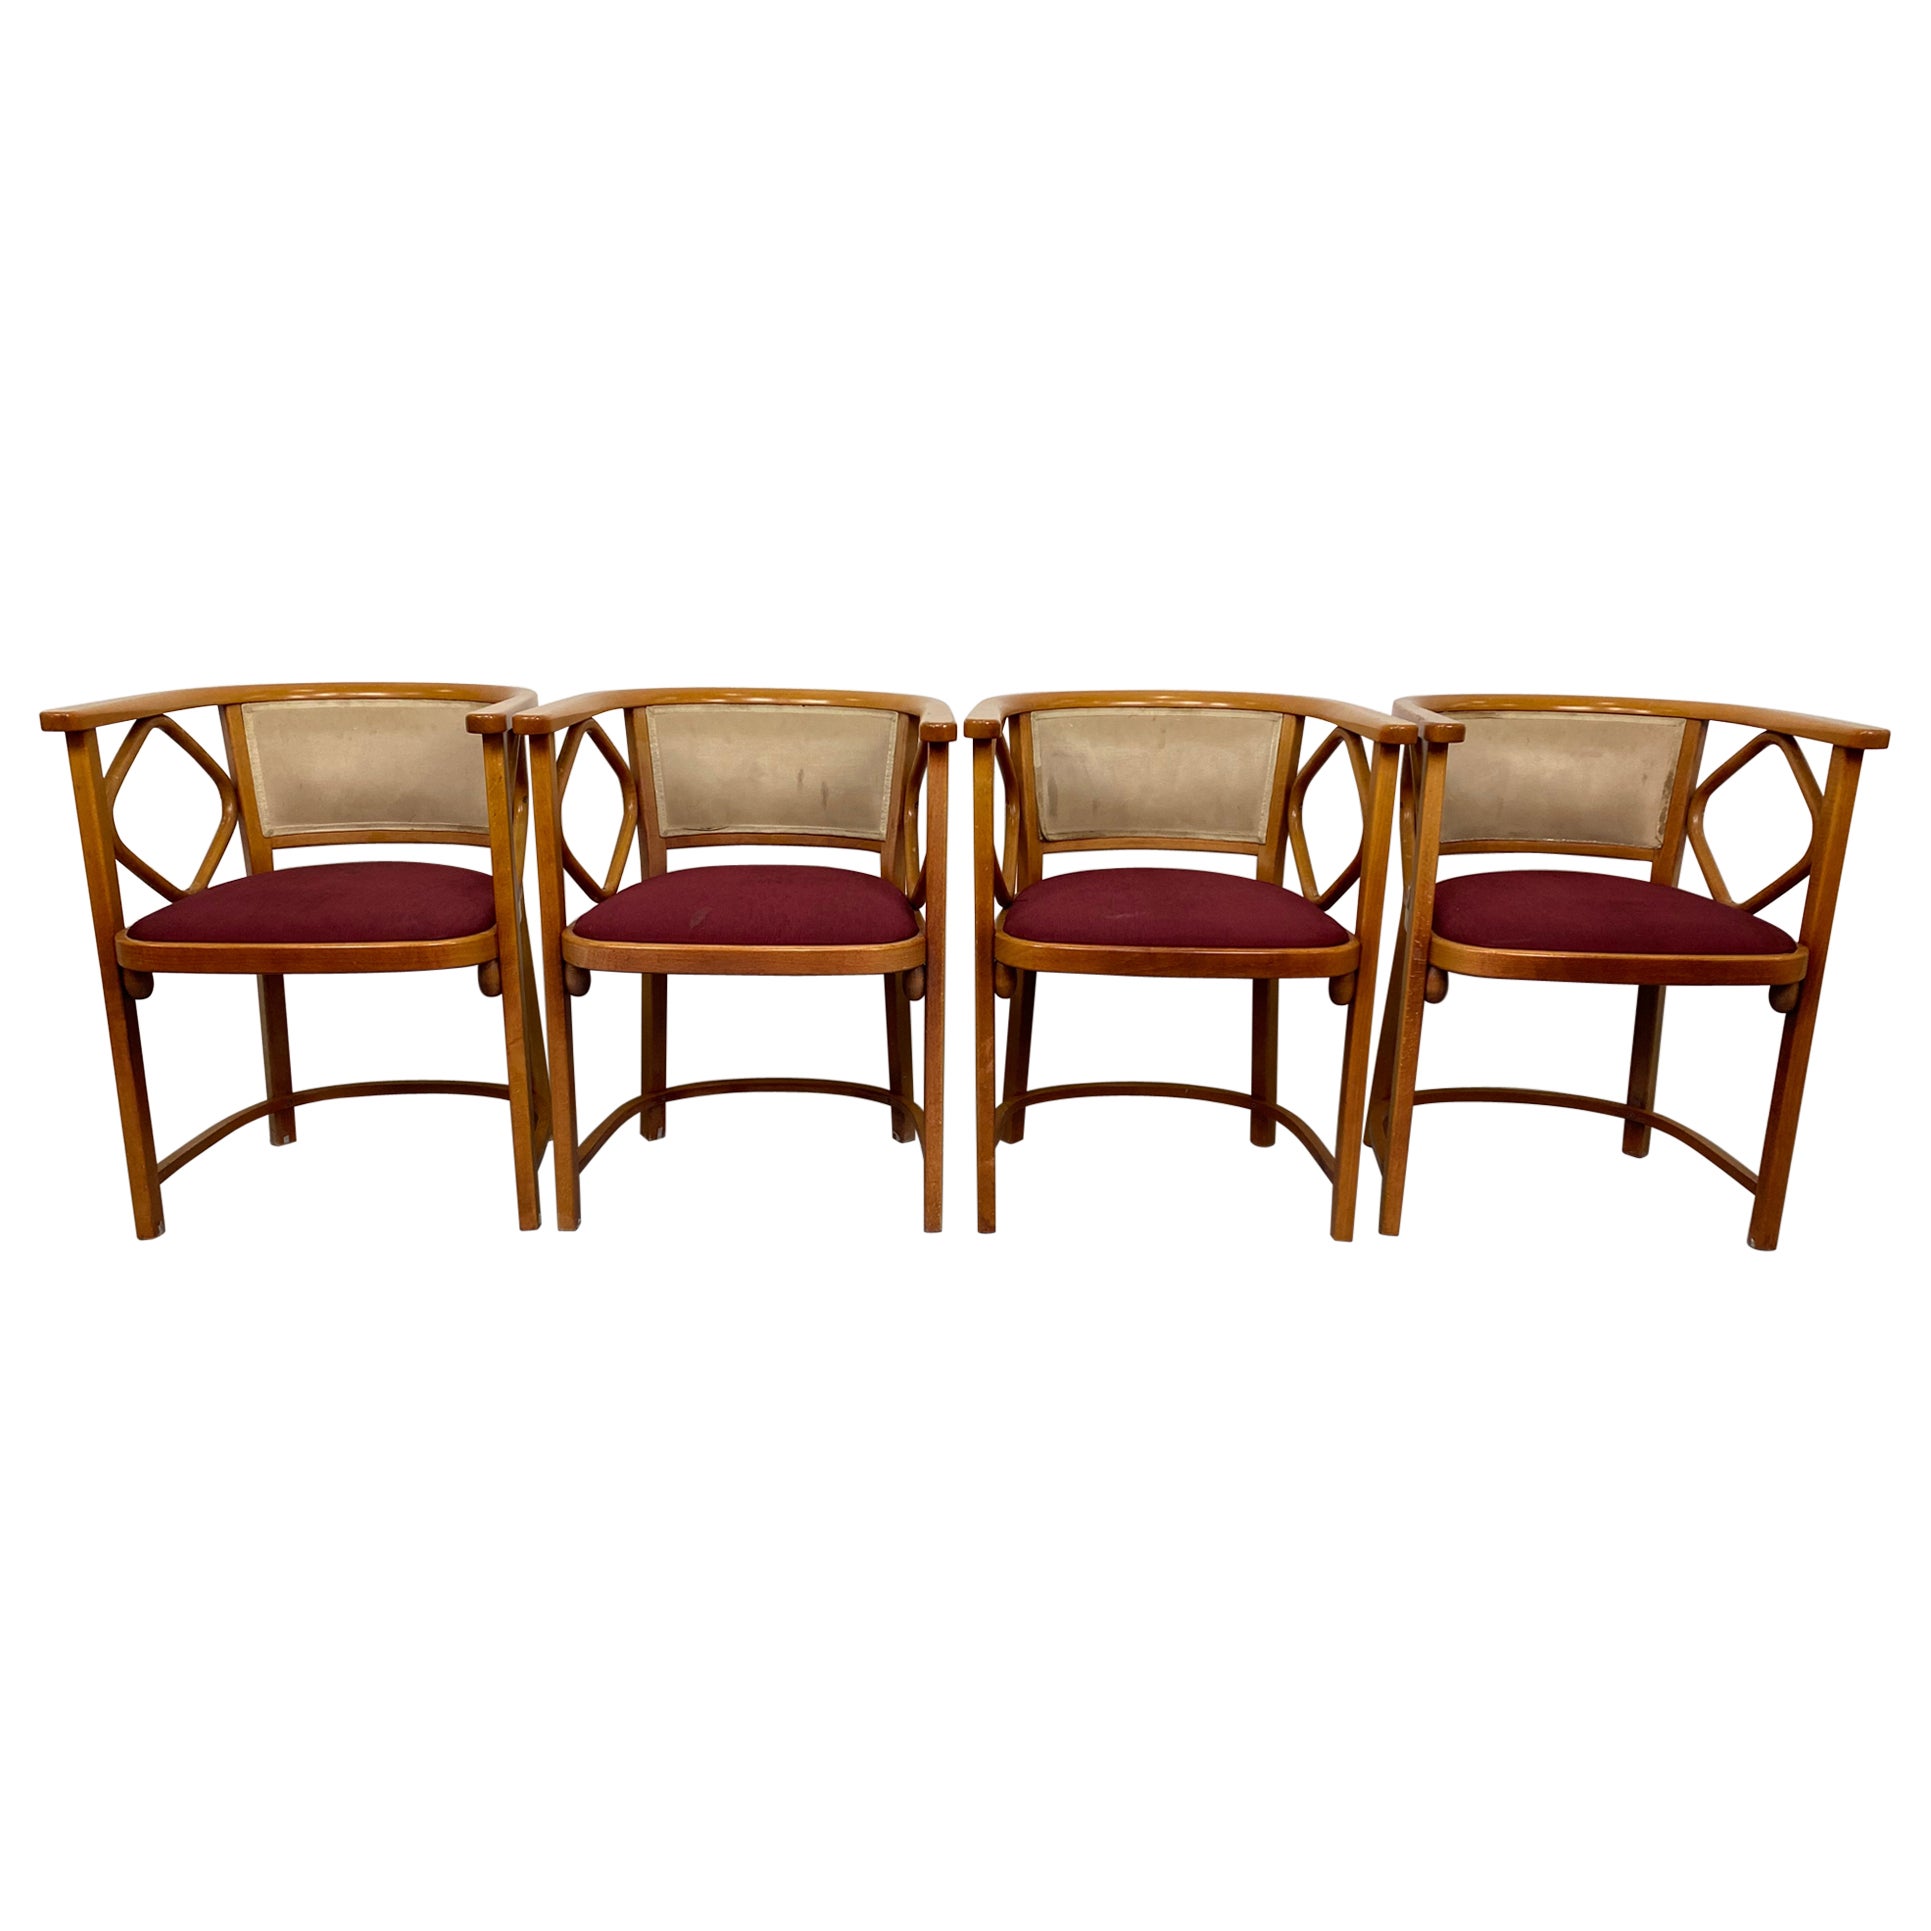 Set of 4 Fledermaus Chairs Executed by Thonet For Sale